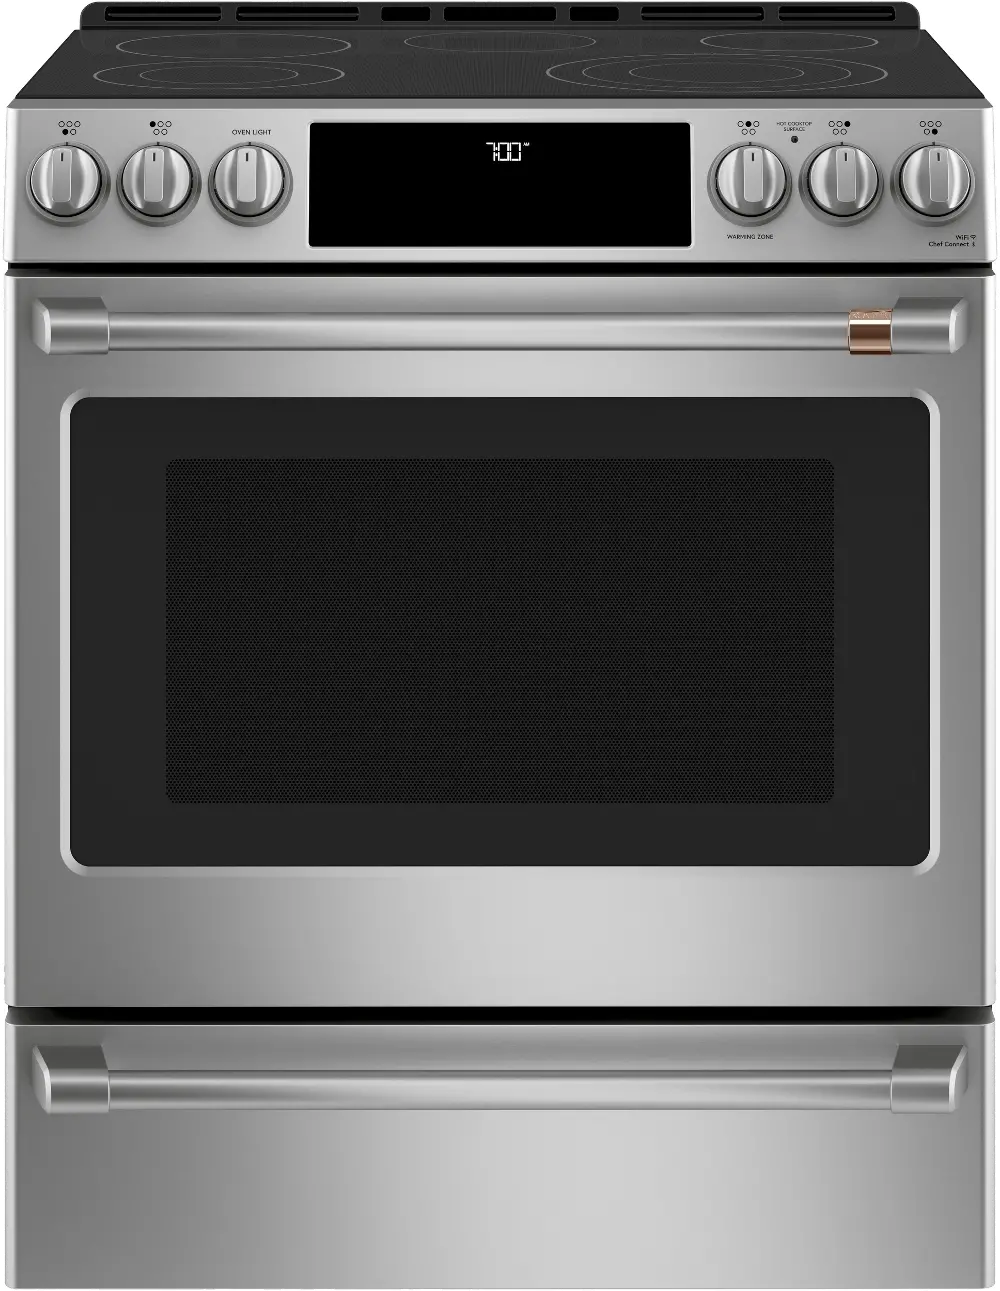 CES700P2MS1 Cafe 5.7 cu ft Electric Range - Stainless Steel-1